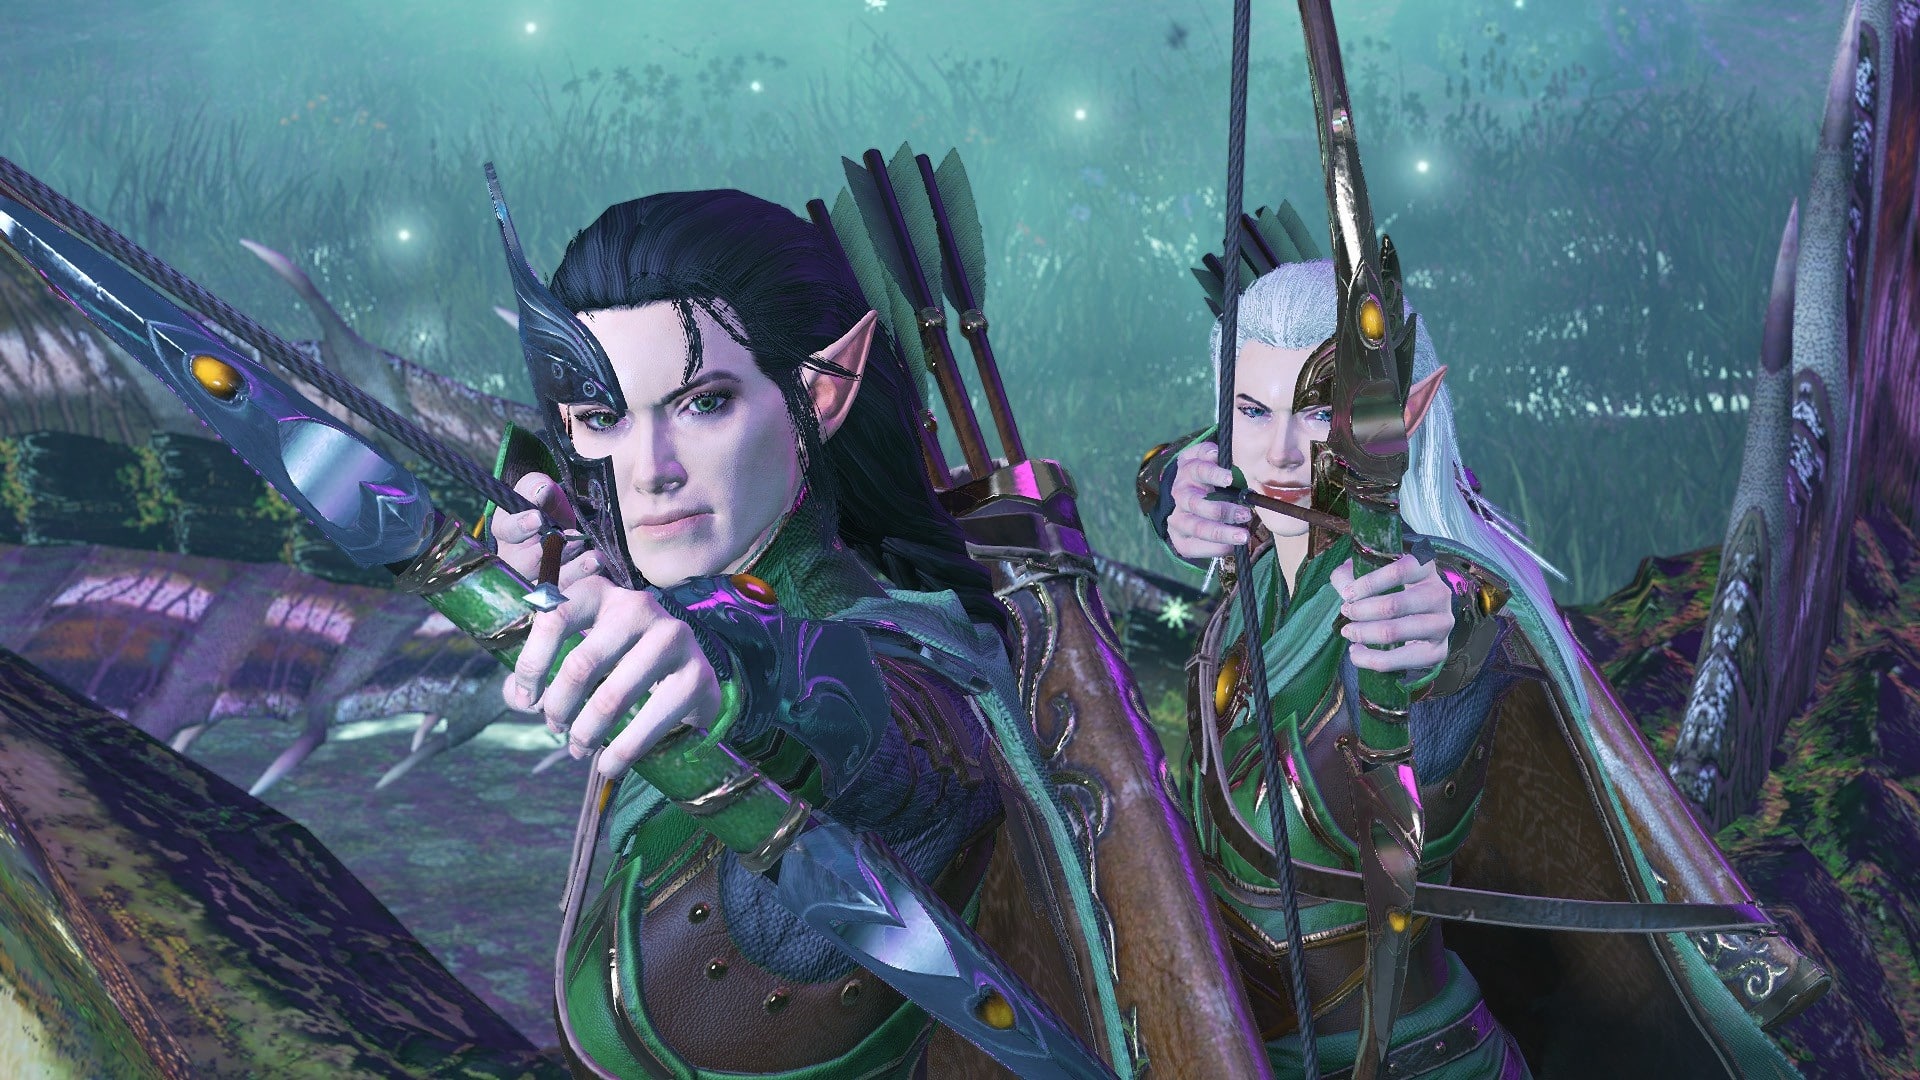 New faction leaders for non-playable factions will always find a place on the campaign map as well. The Twilight Twins of the Wood Elves, for example, live in the new world of Warhammer 2.